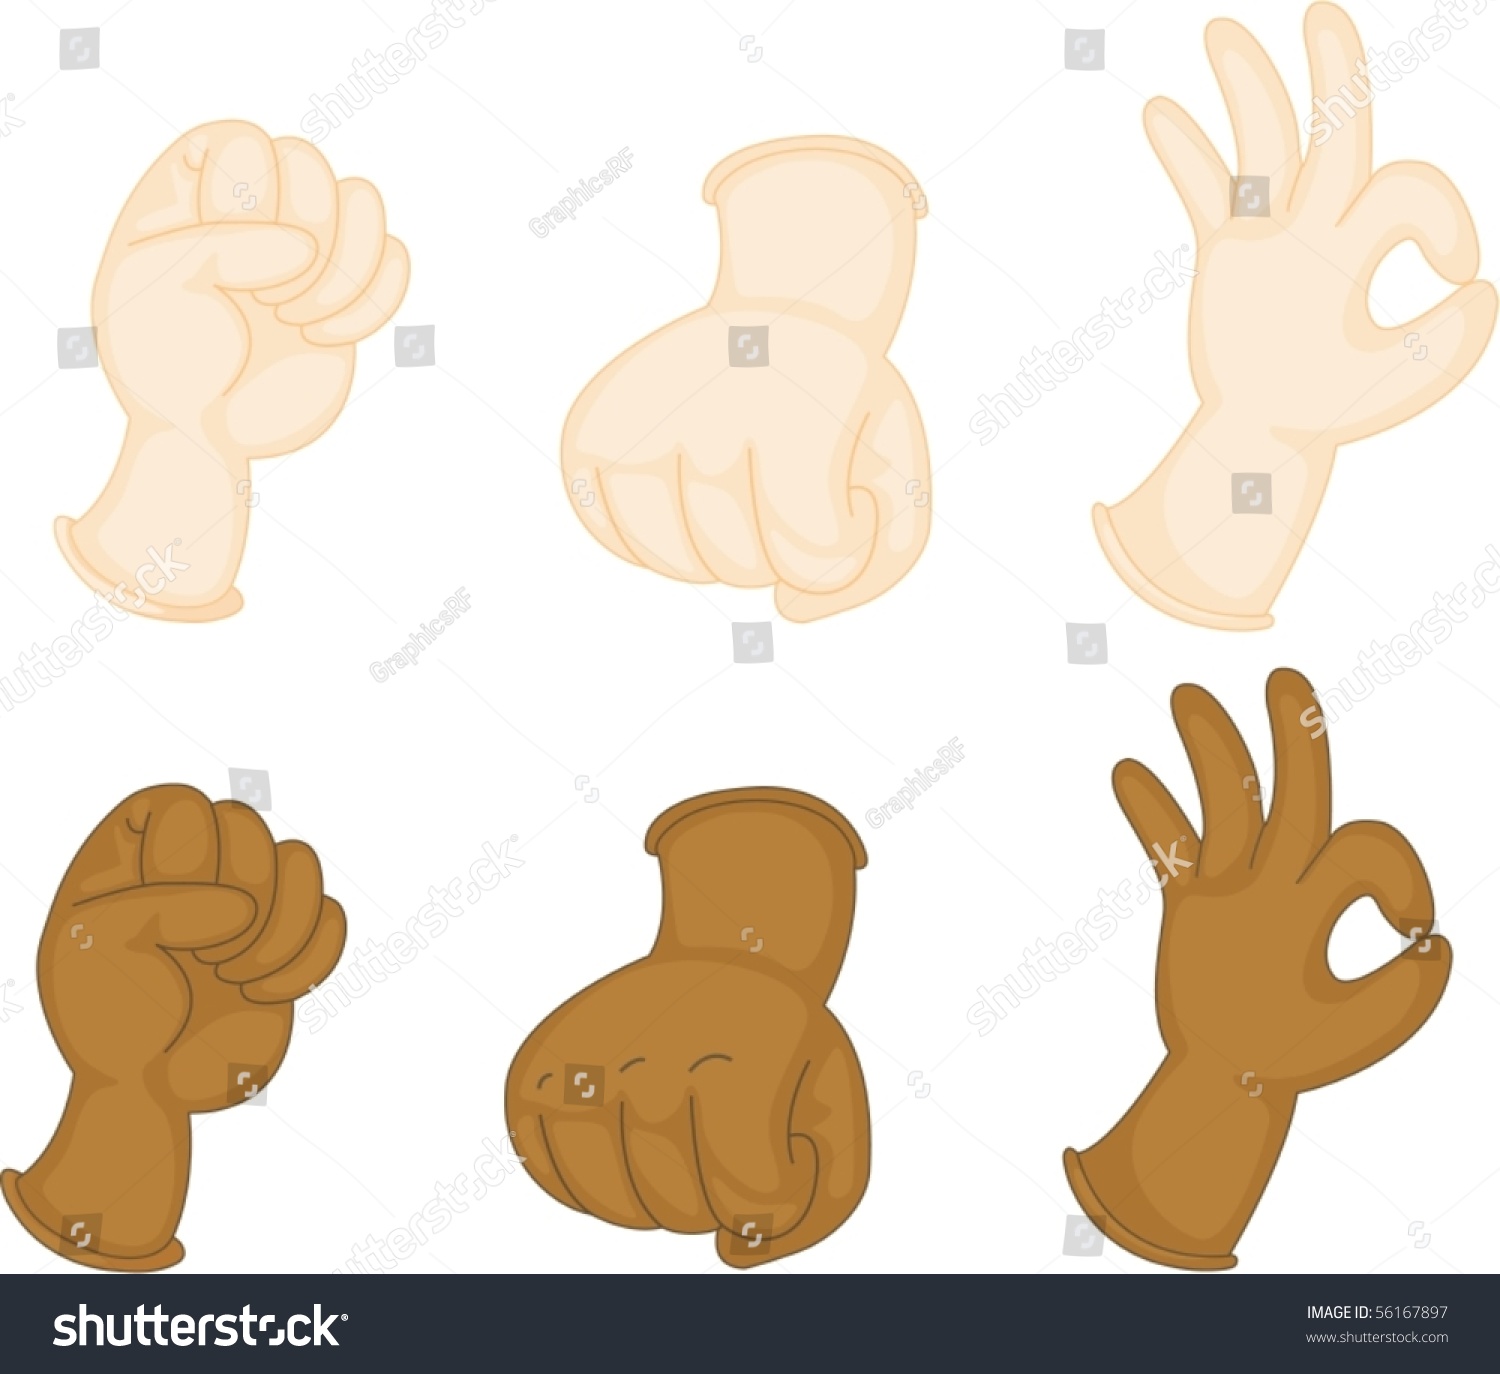 Illustration Of Hands Showing Various Indications On White Background